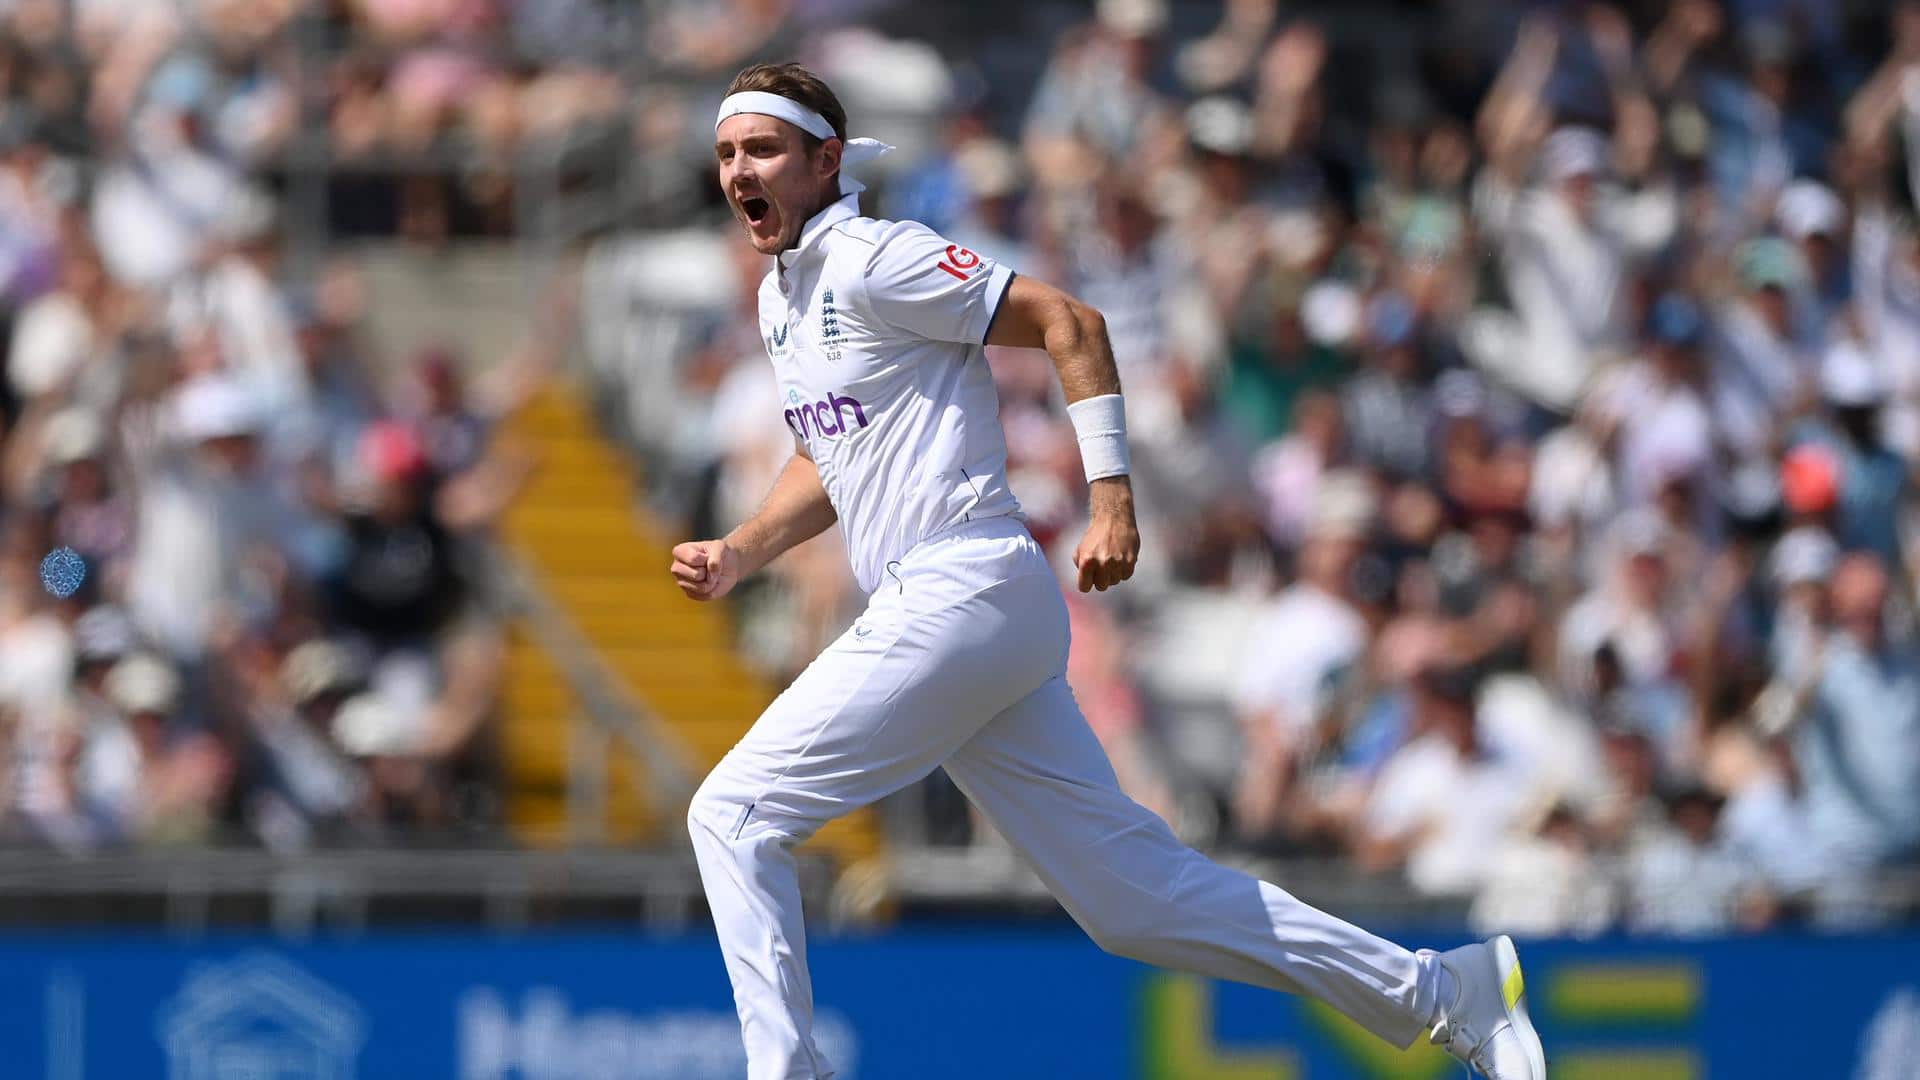 Stuart Broad becomes second pacer to take 600 Test wickets